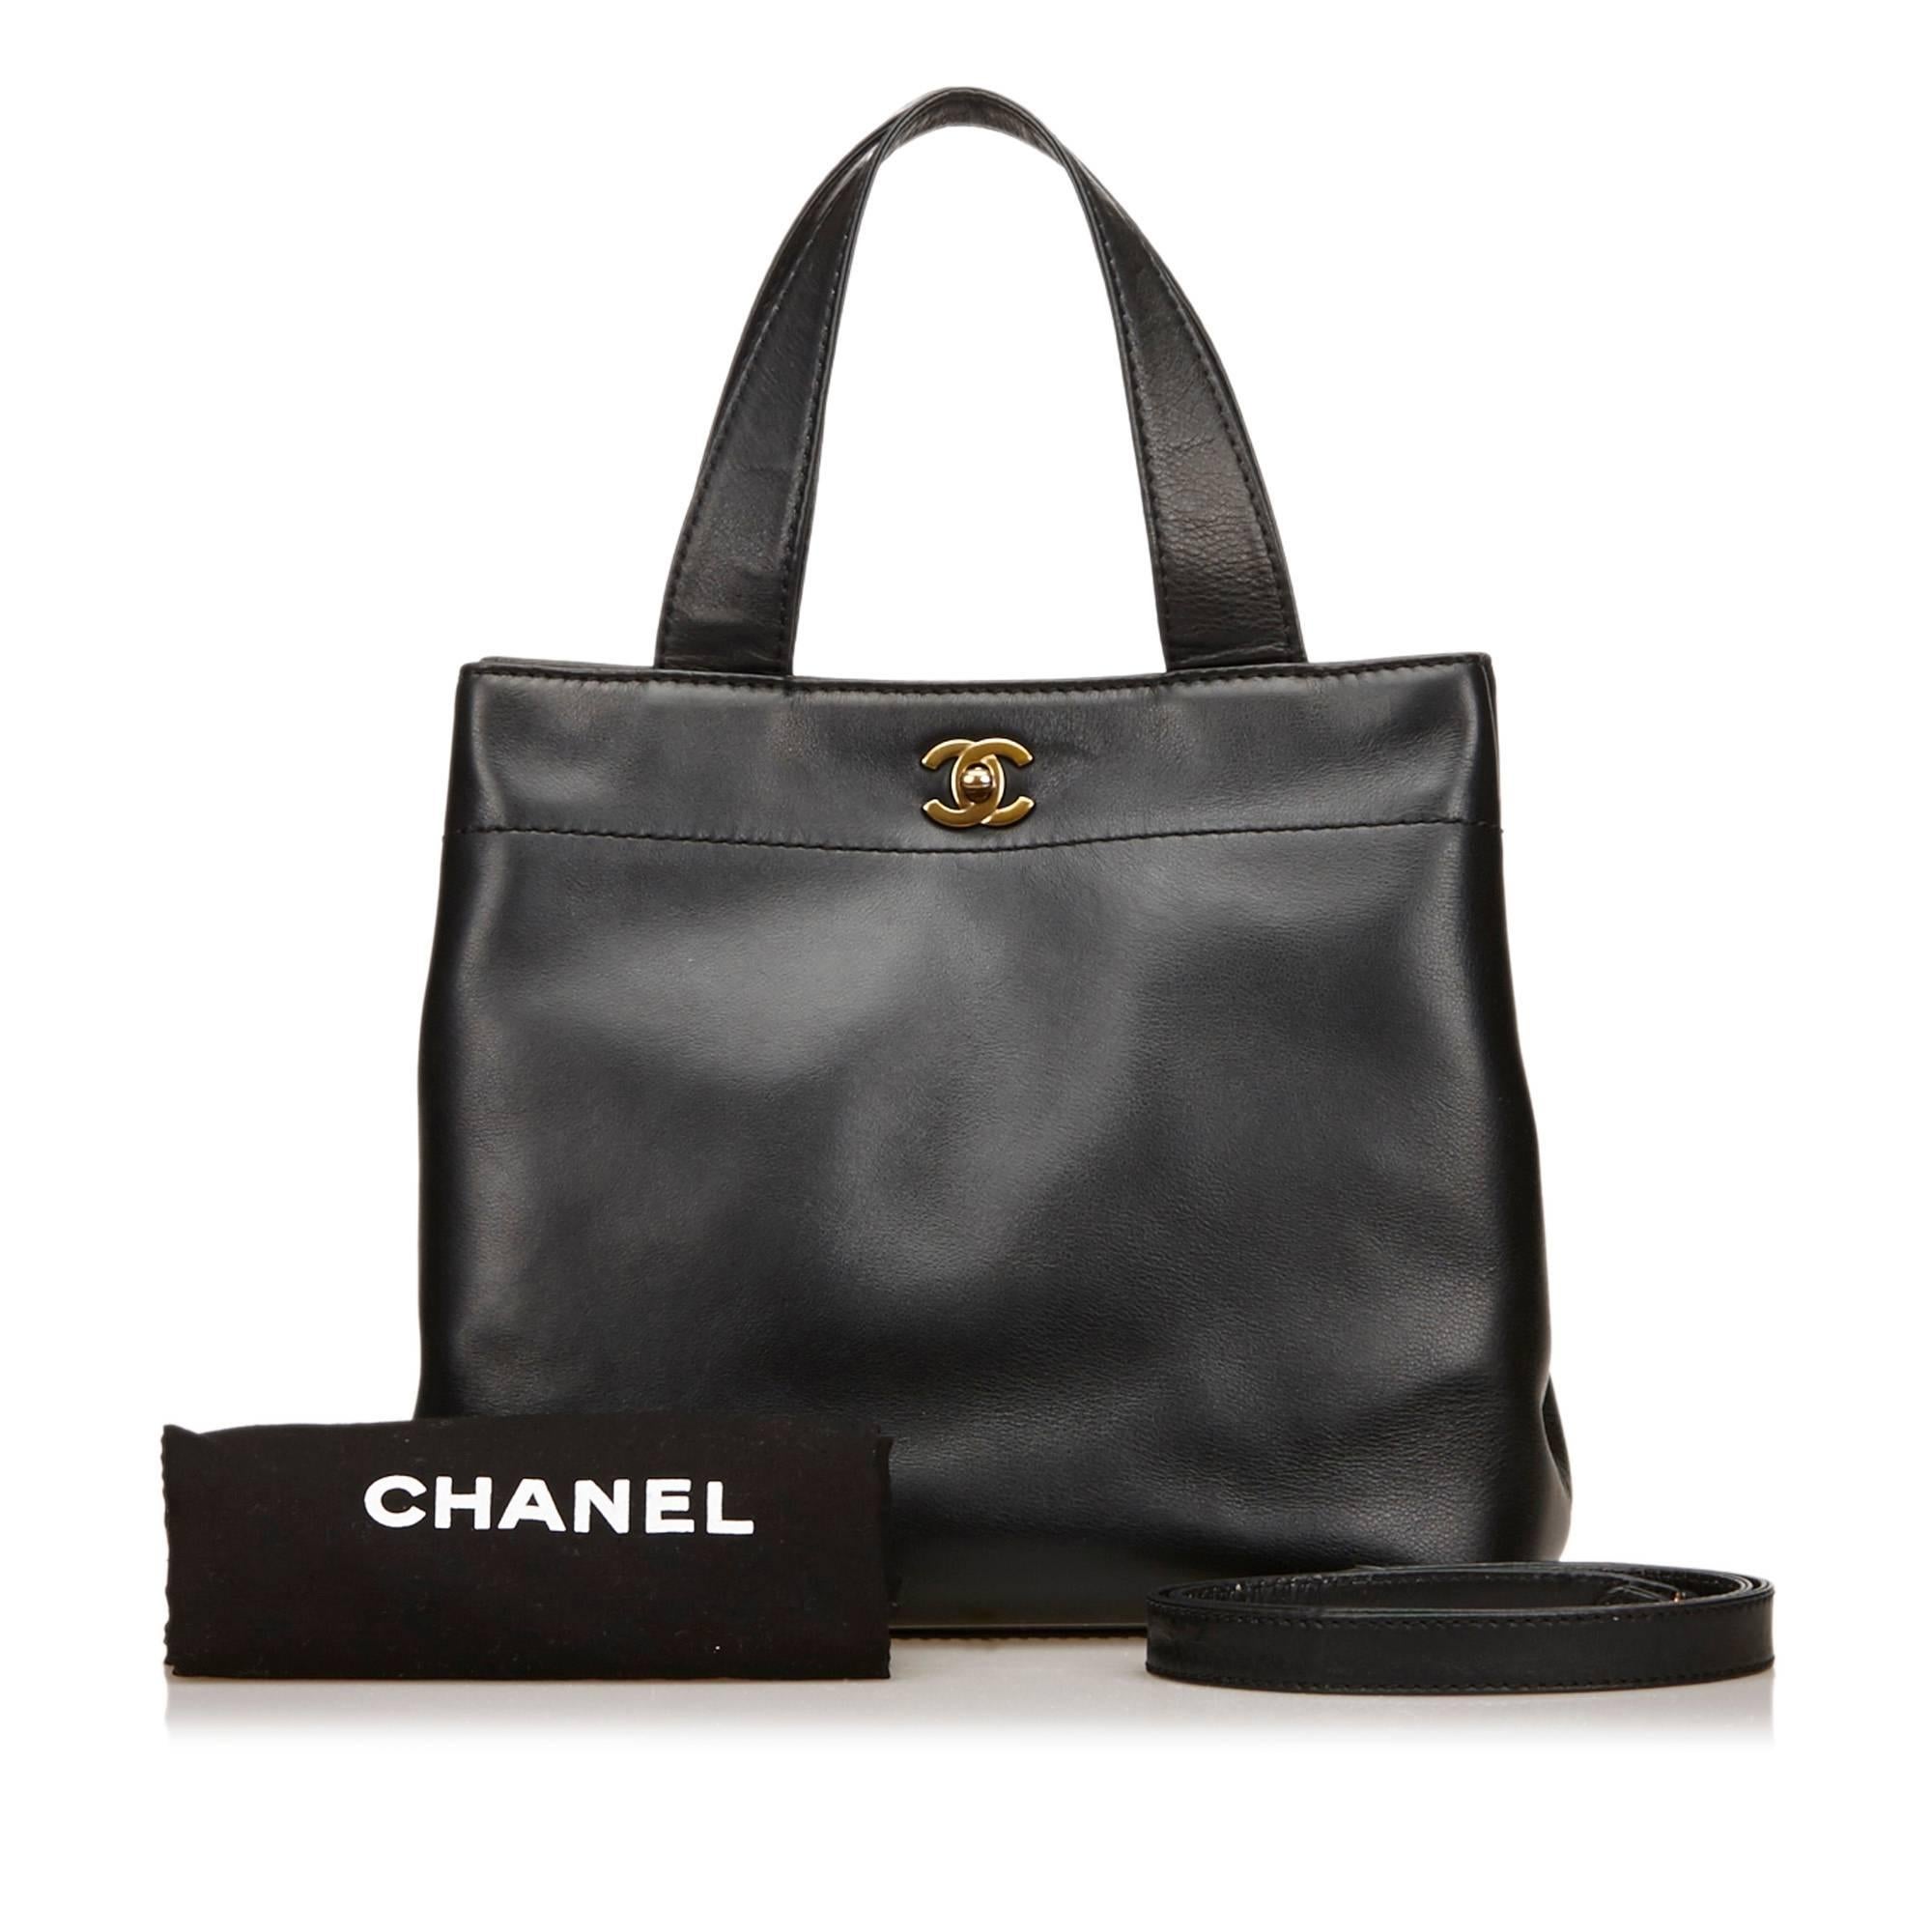 Black Chanel Leather Tote Bag 4